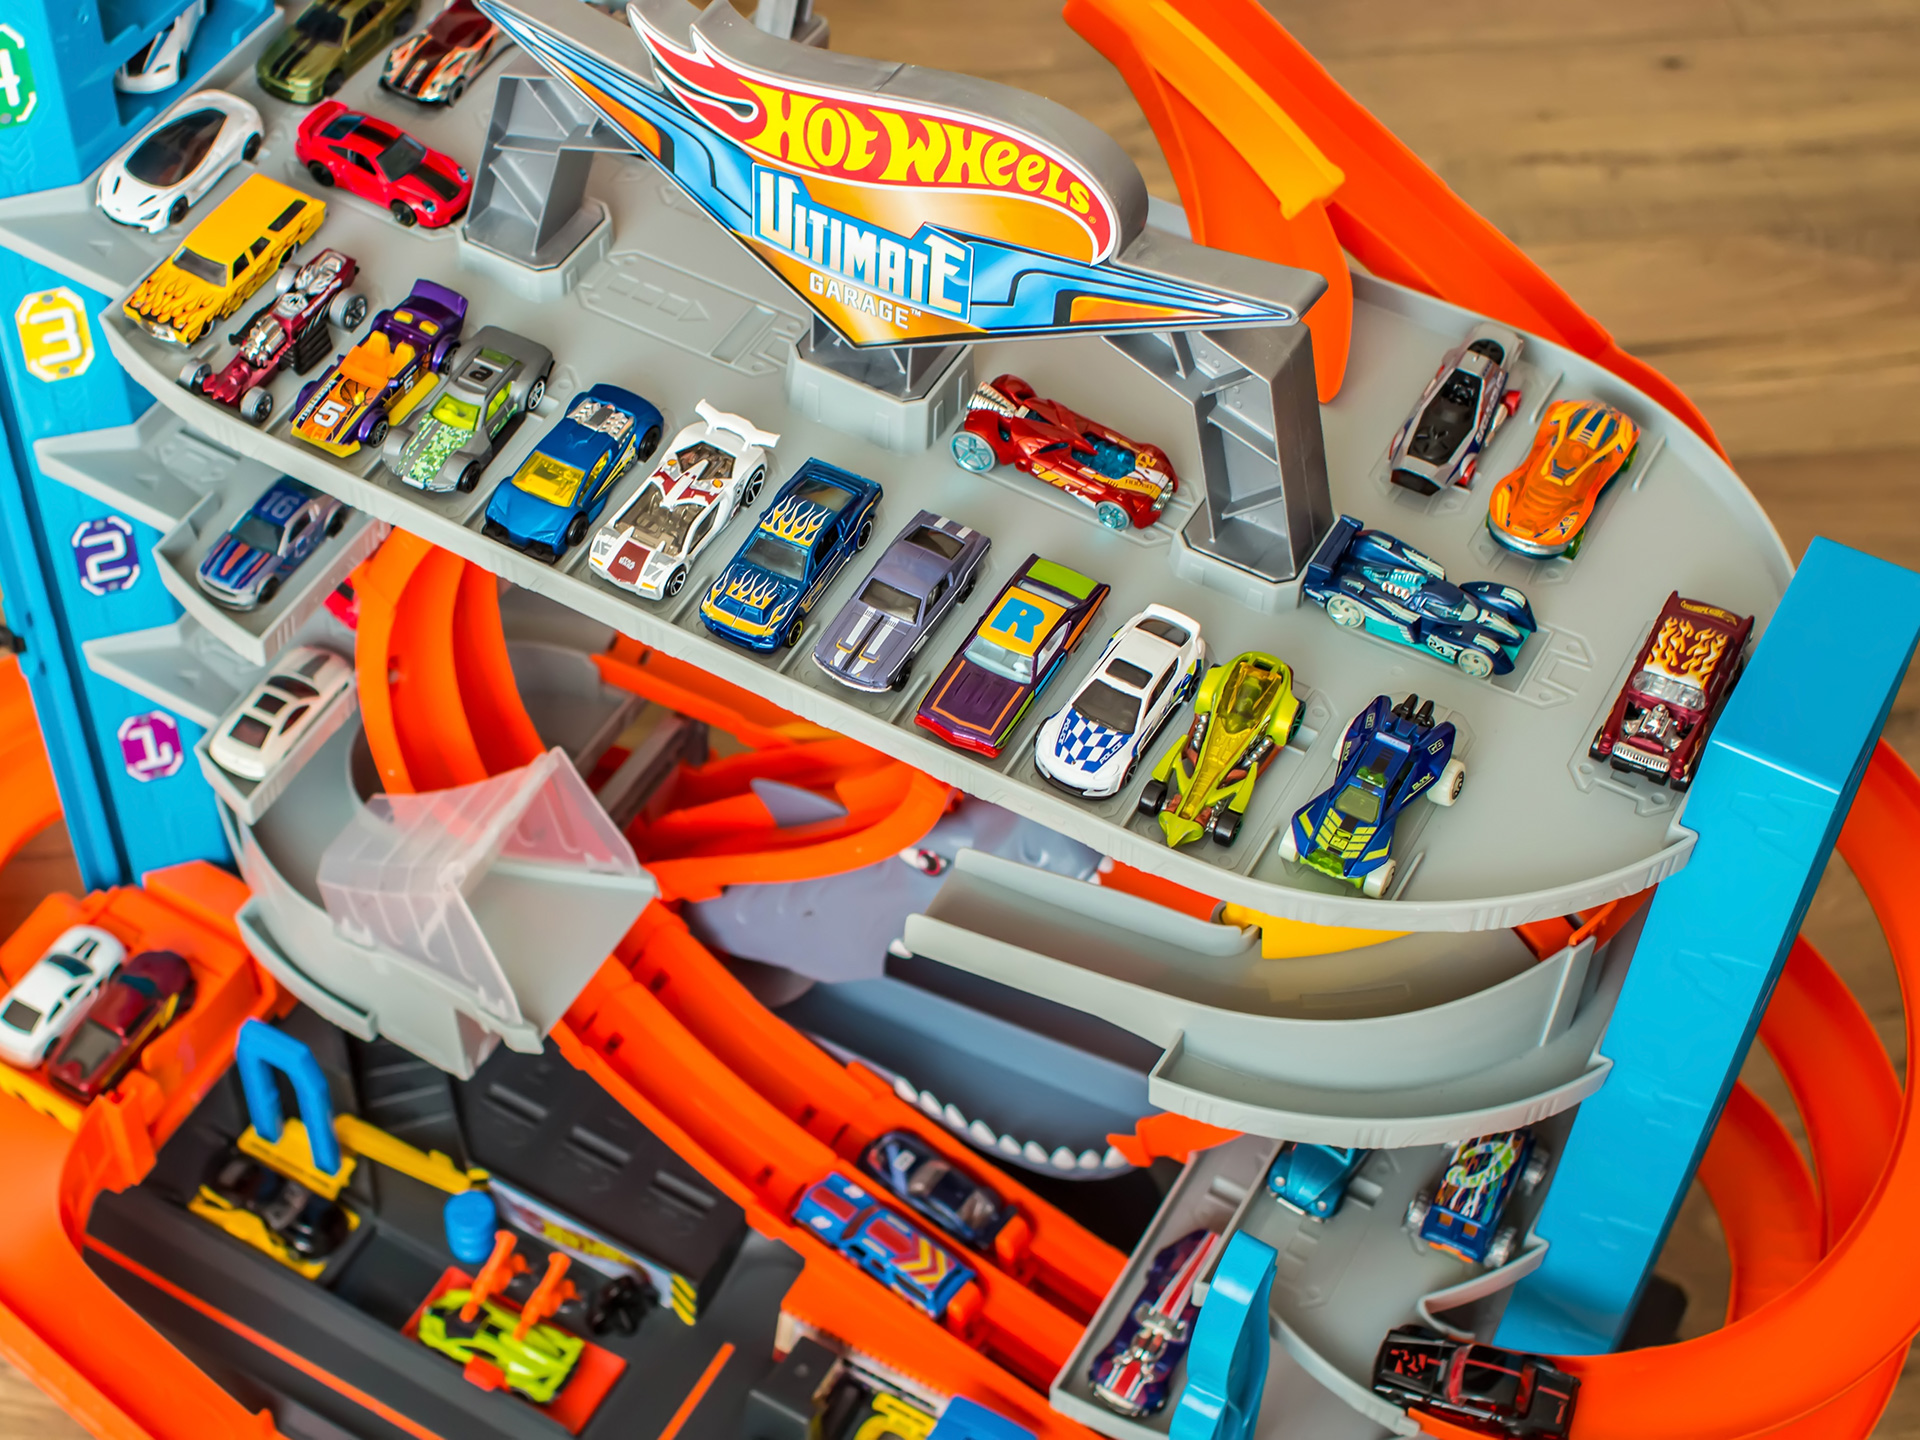 The best Hot Wheels tracks and playsets for you and your kids